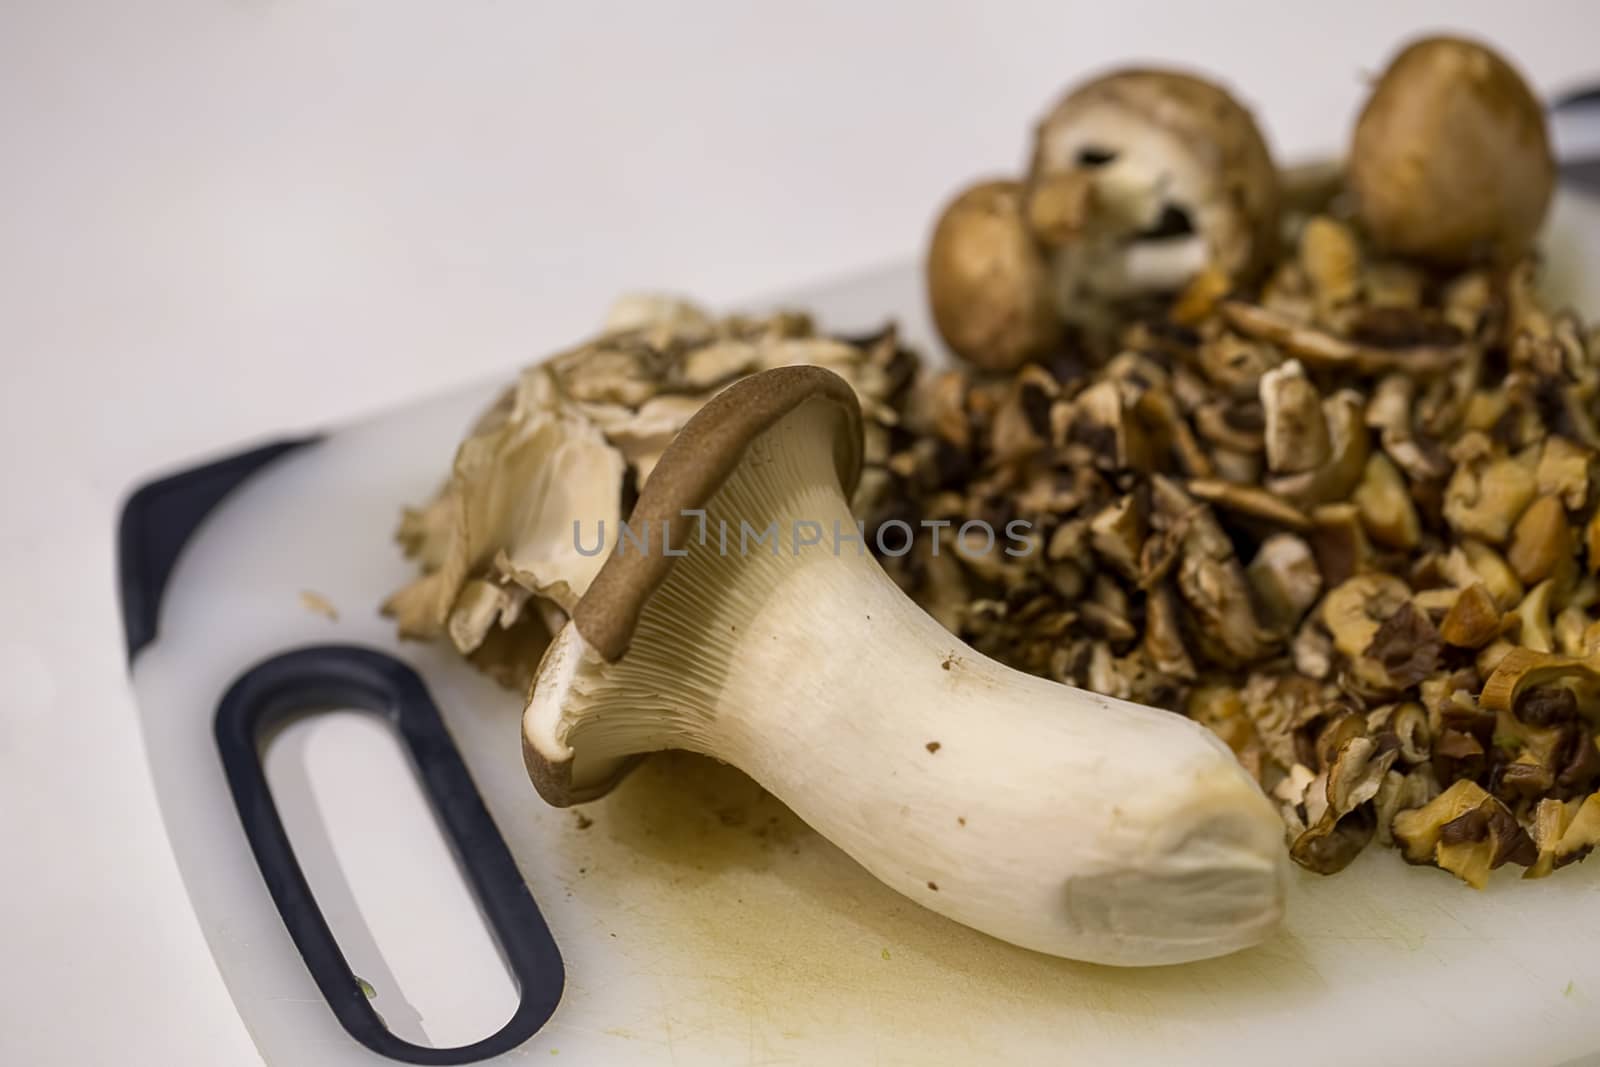 Oyster, shitake and brown mushoorms on a white chopping board